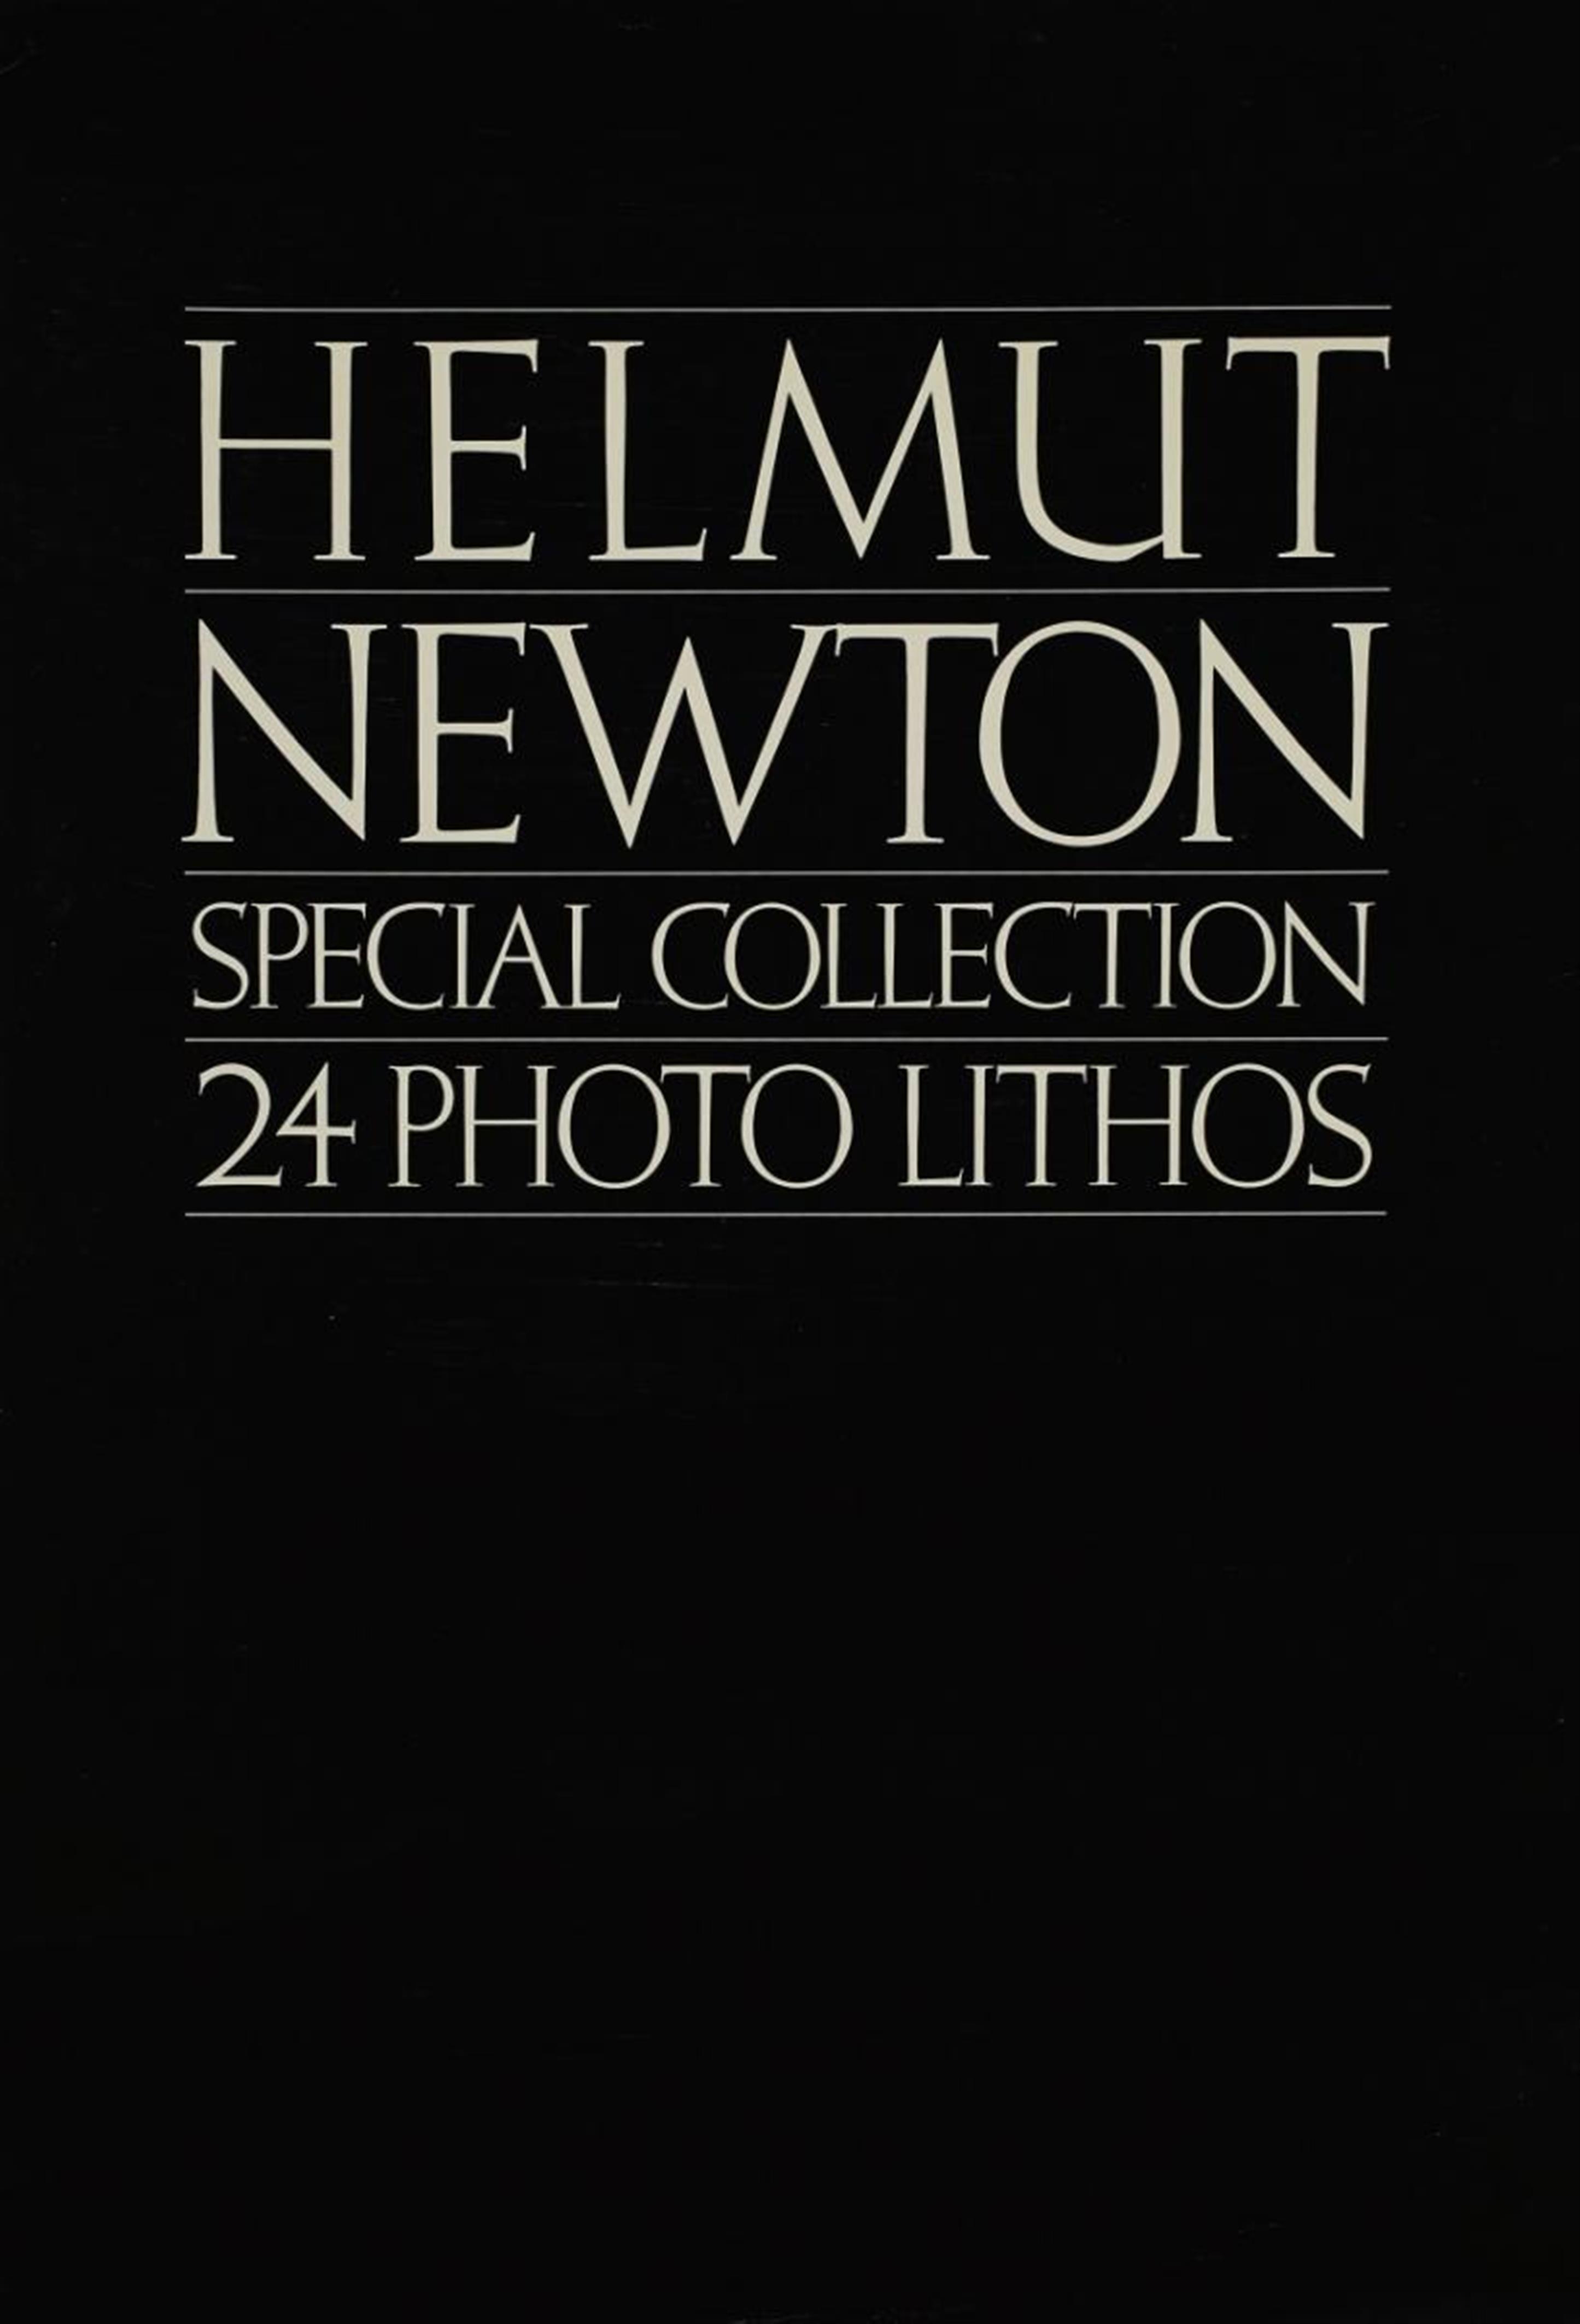 Helmut Newton - Special collection. 24 photo lithos - image-1